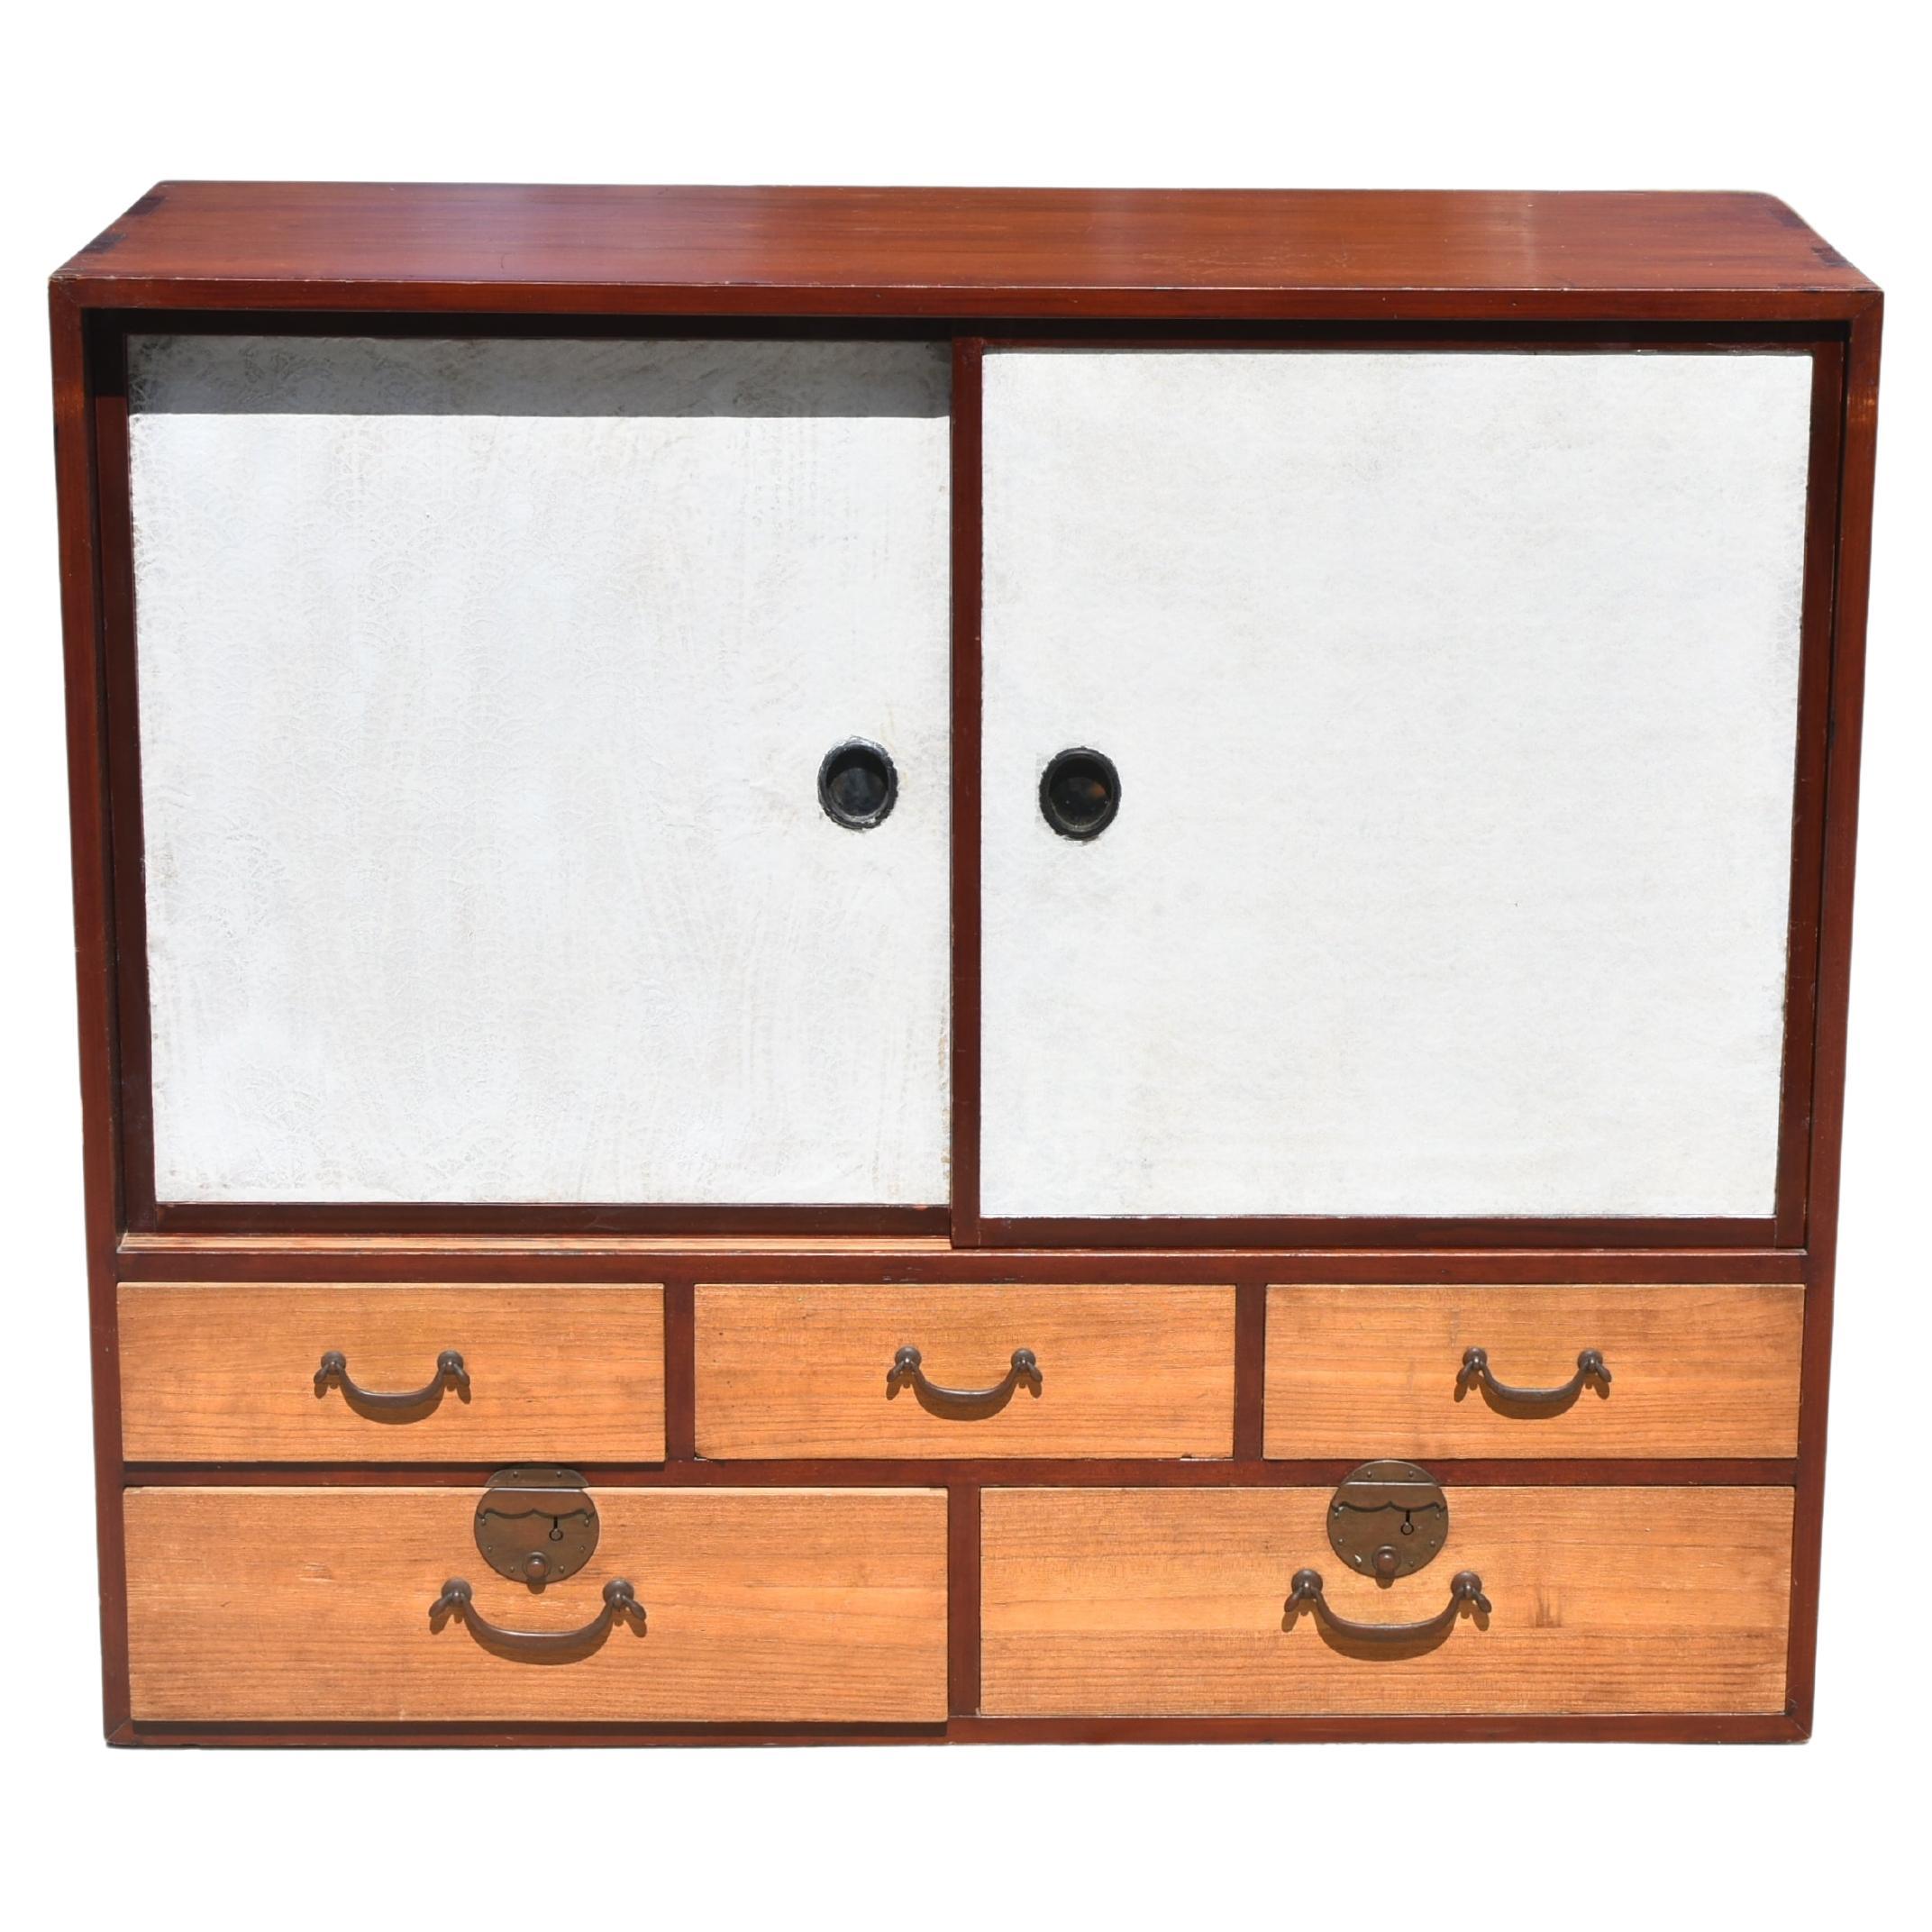 Japanese Tansu with White Sliding Doors For Sale